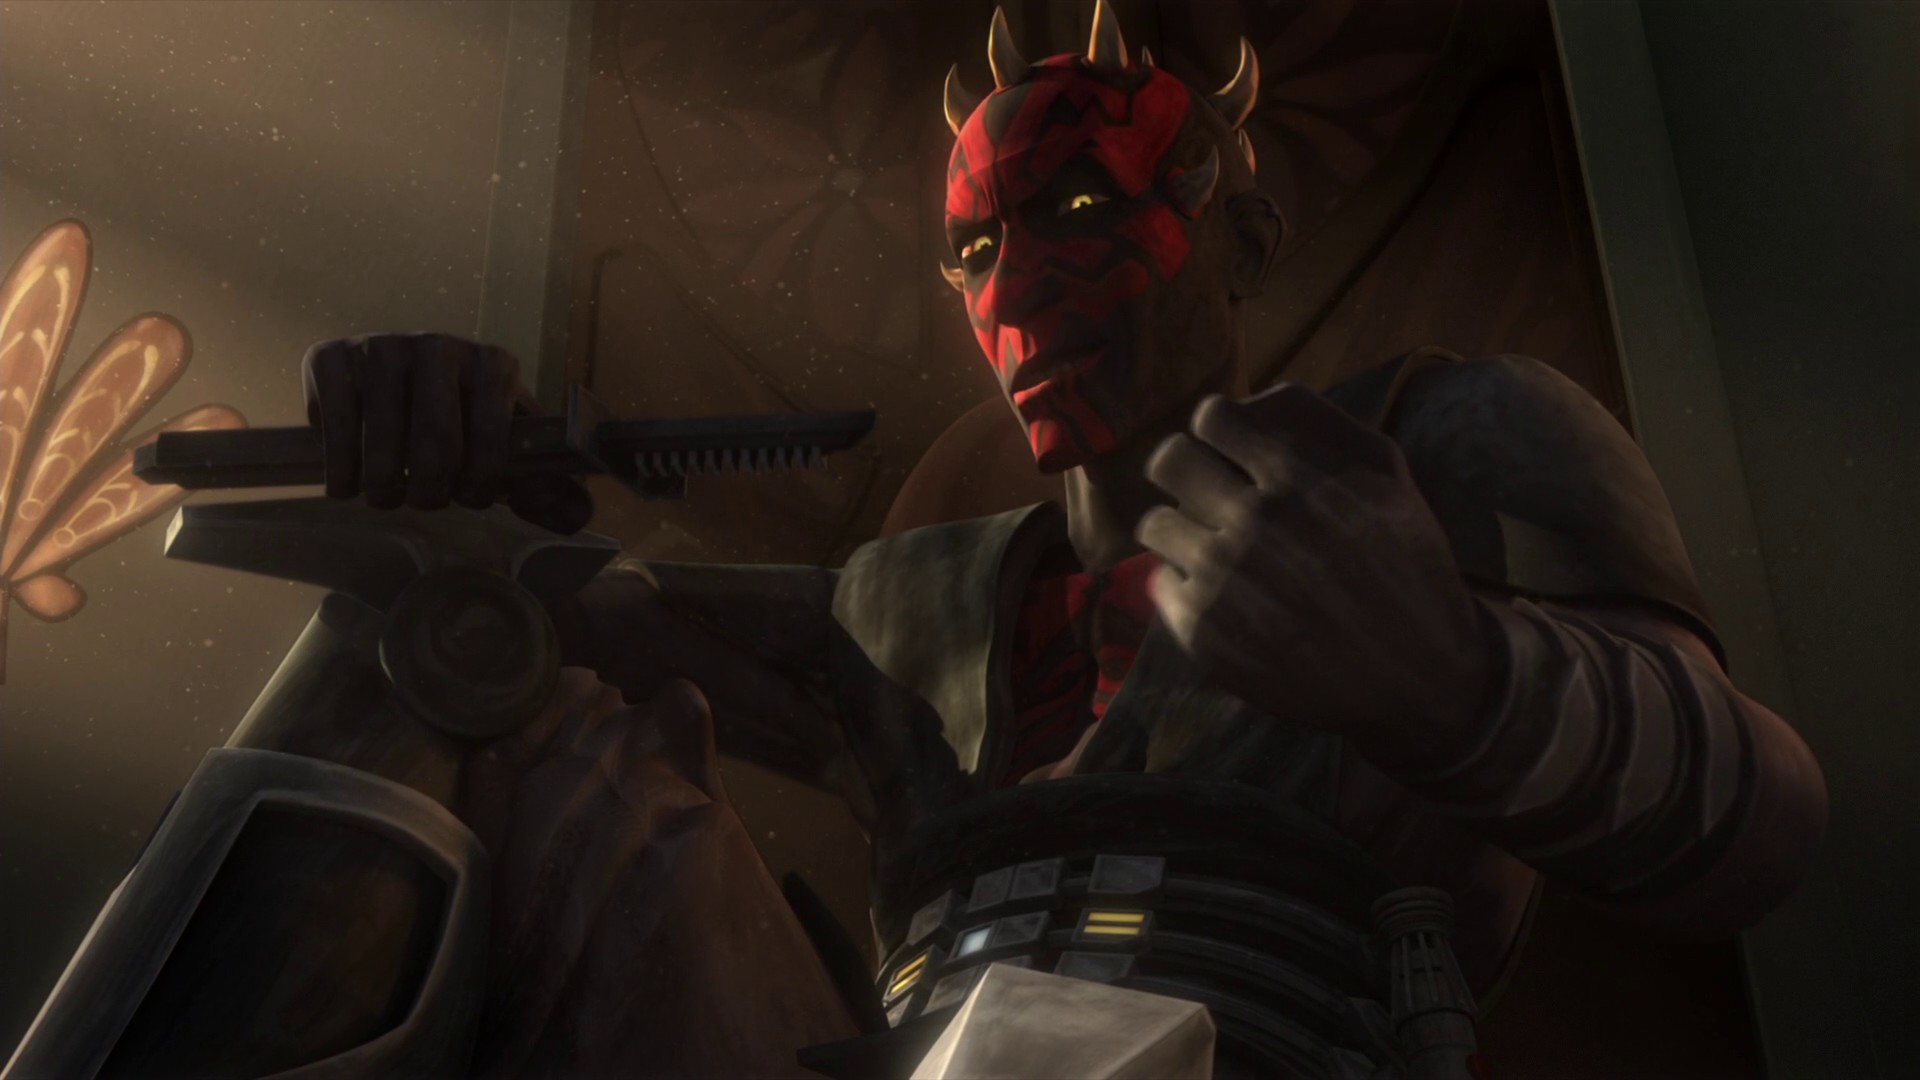 Darth Maul will have the usual force user nerf in these fights Choke,Grip,Mind tricks everything else is fine